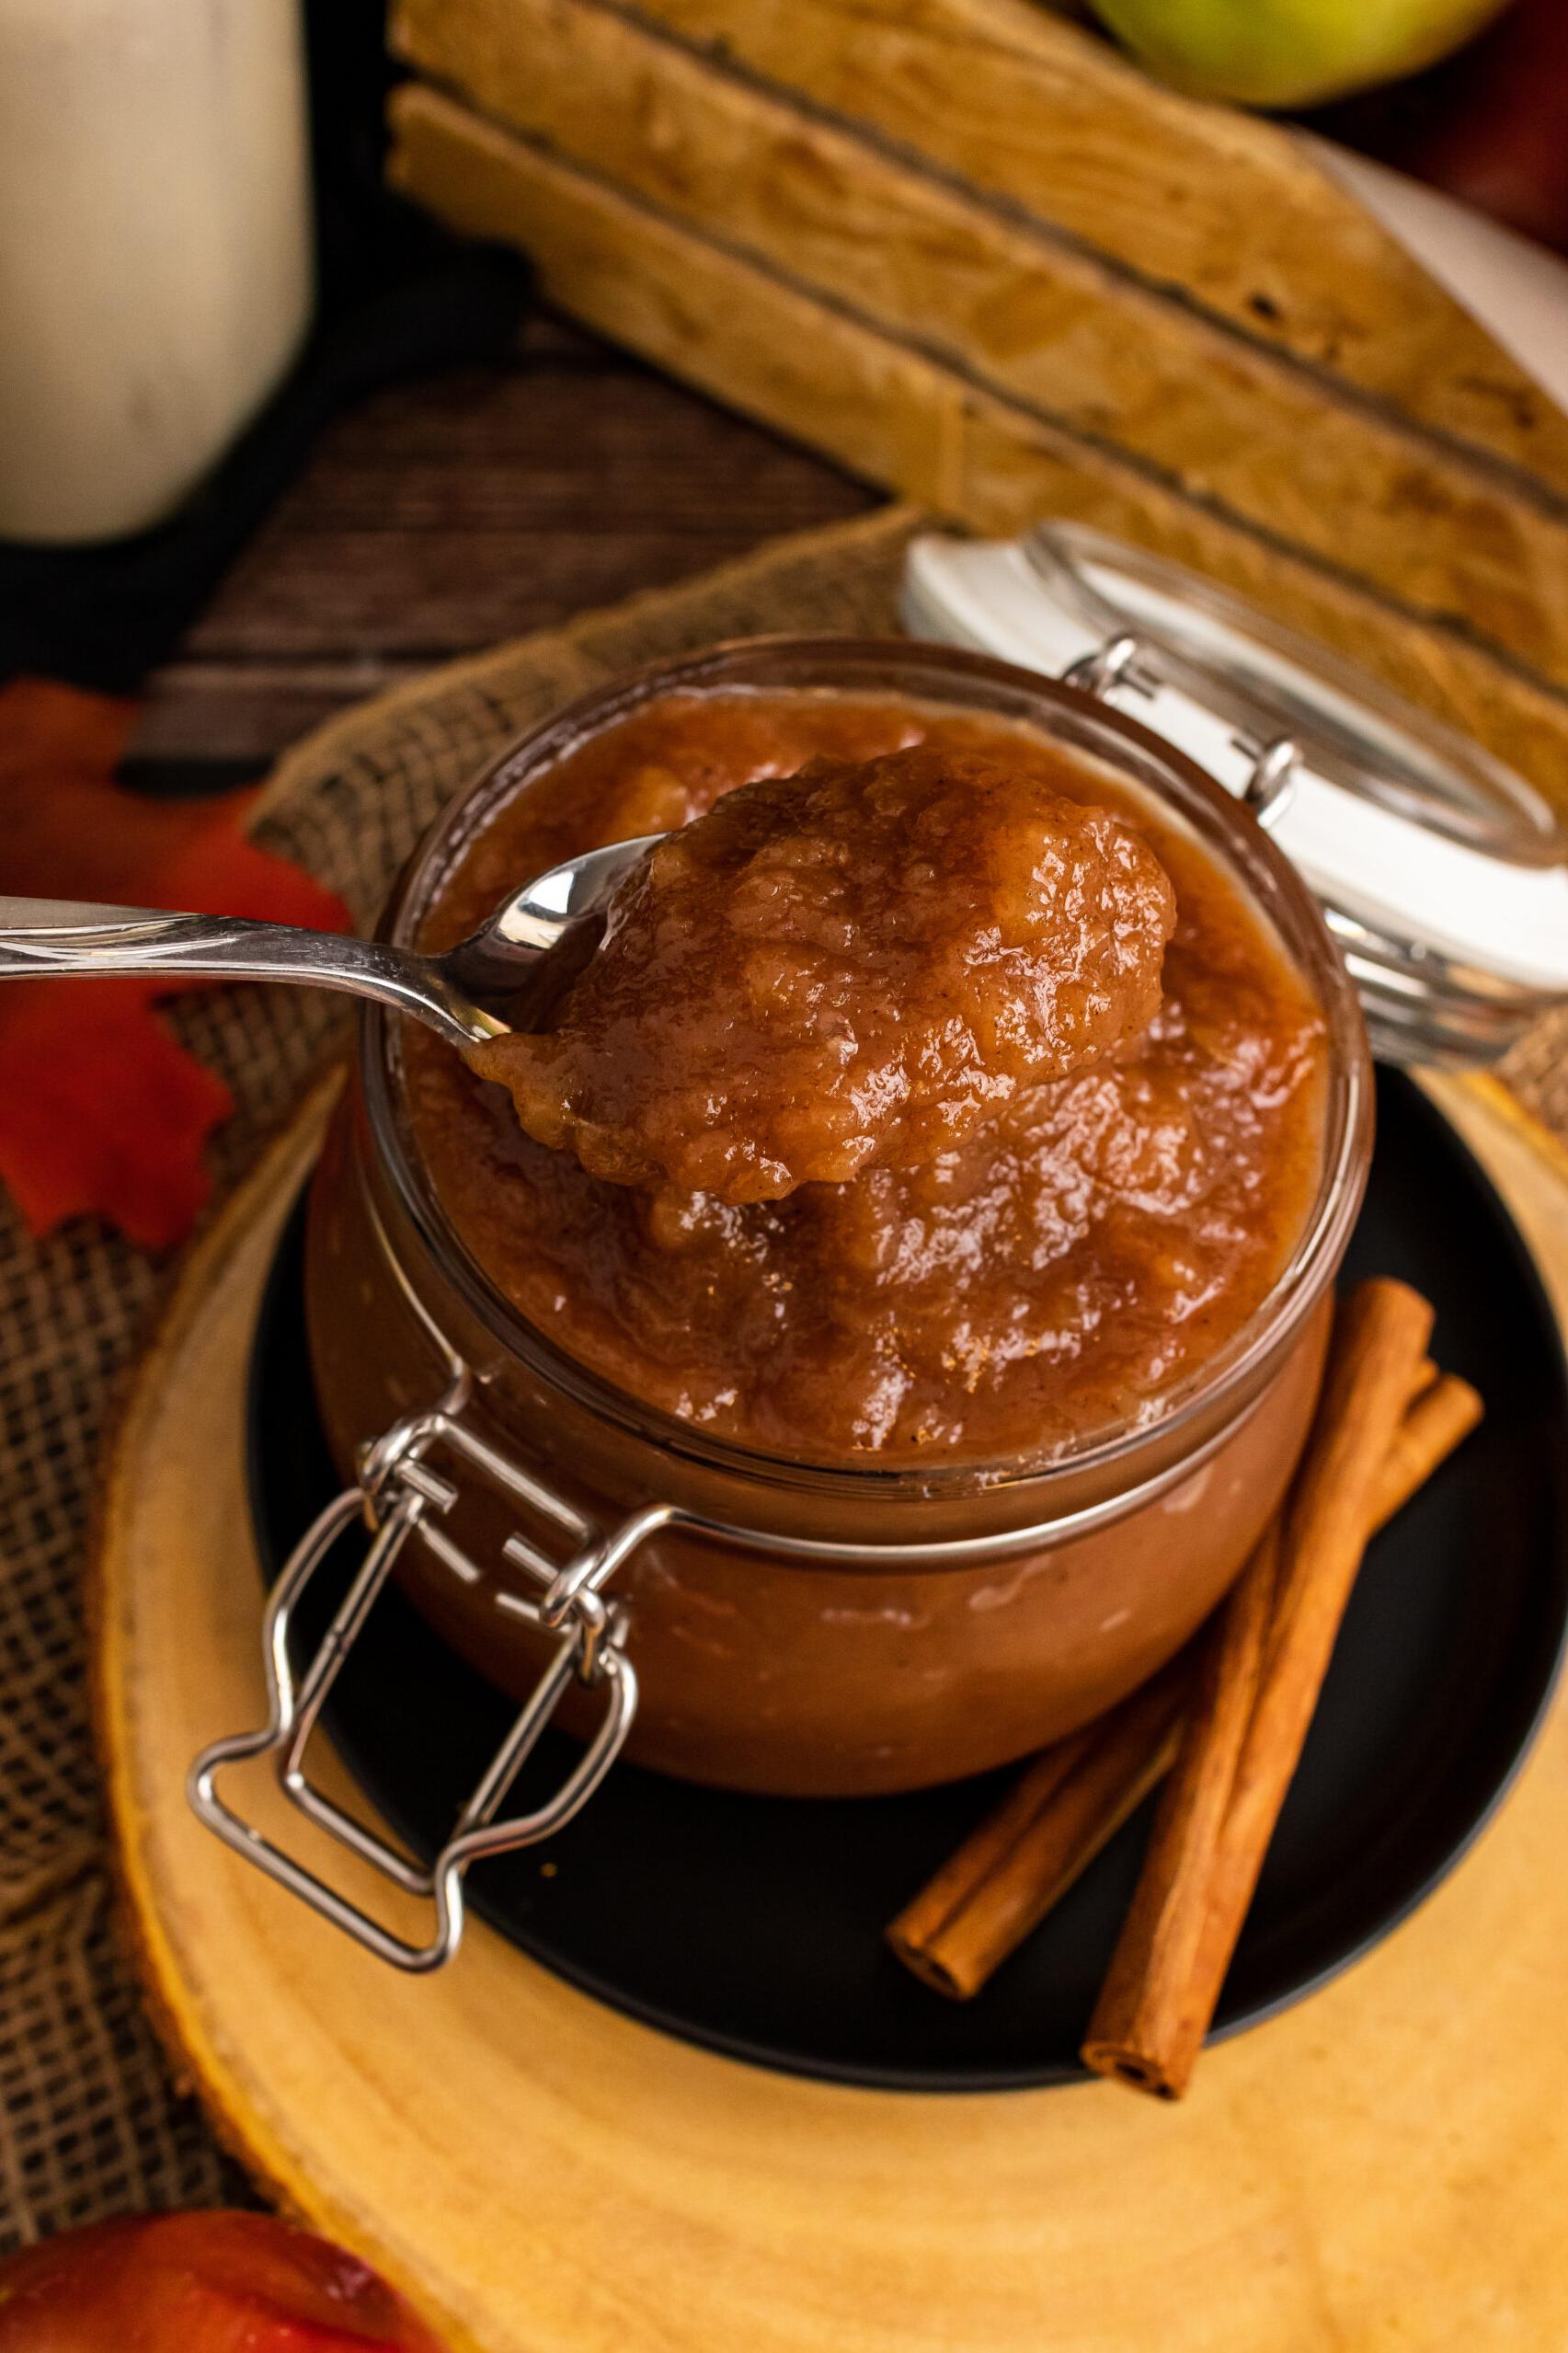  Take a bite of the South with this delicious homemade apple butter